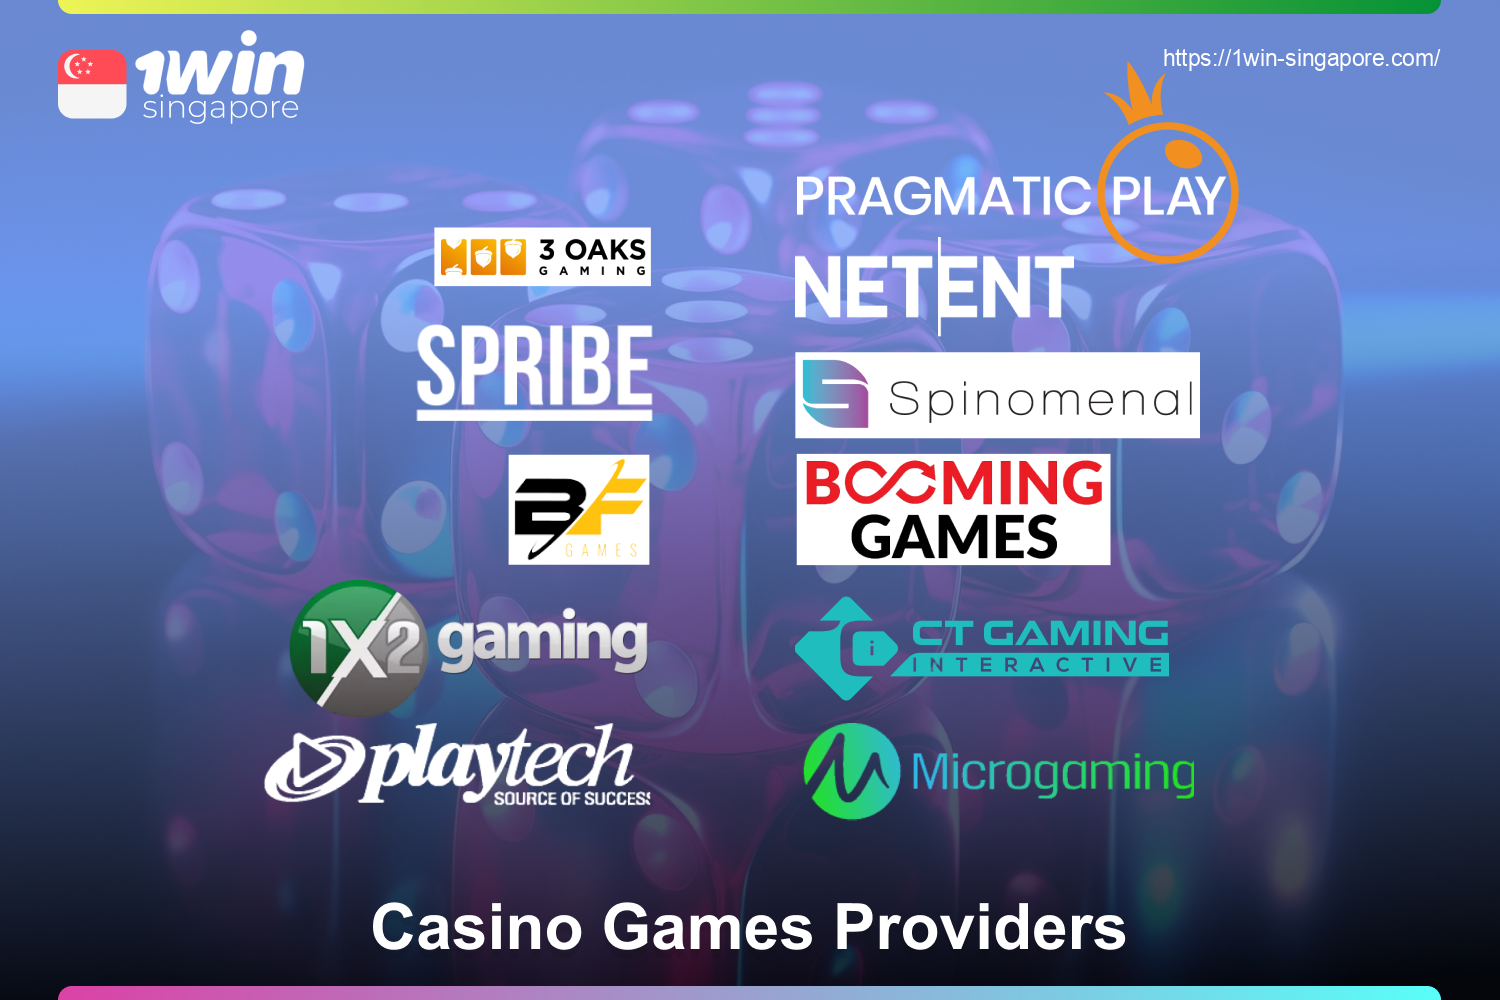 1win works directly with a number of popular providers, so when they release new games, players from Singapore can immediately play them here